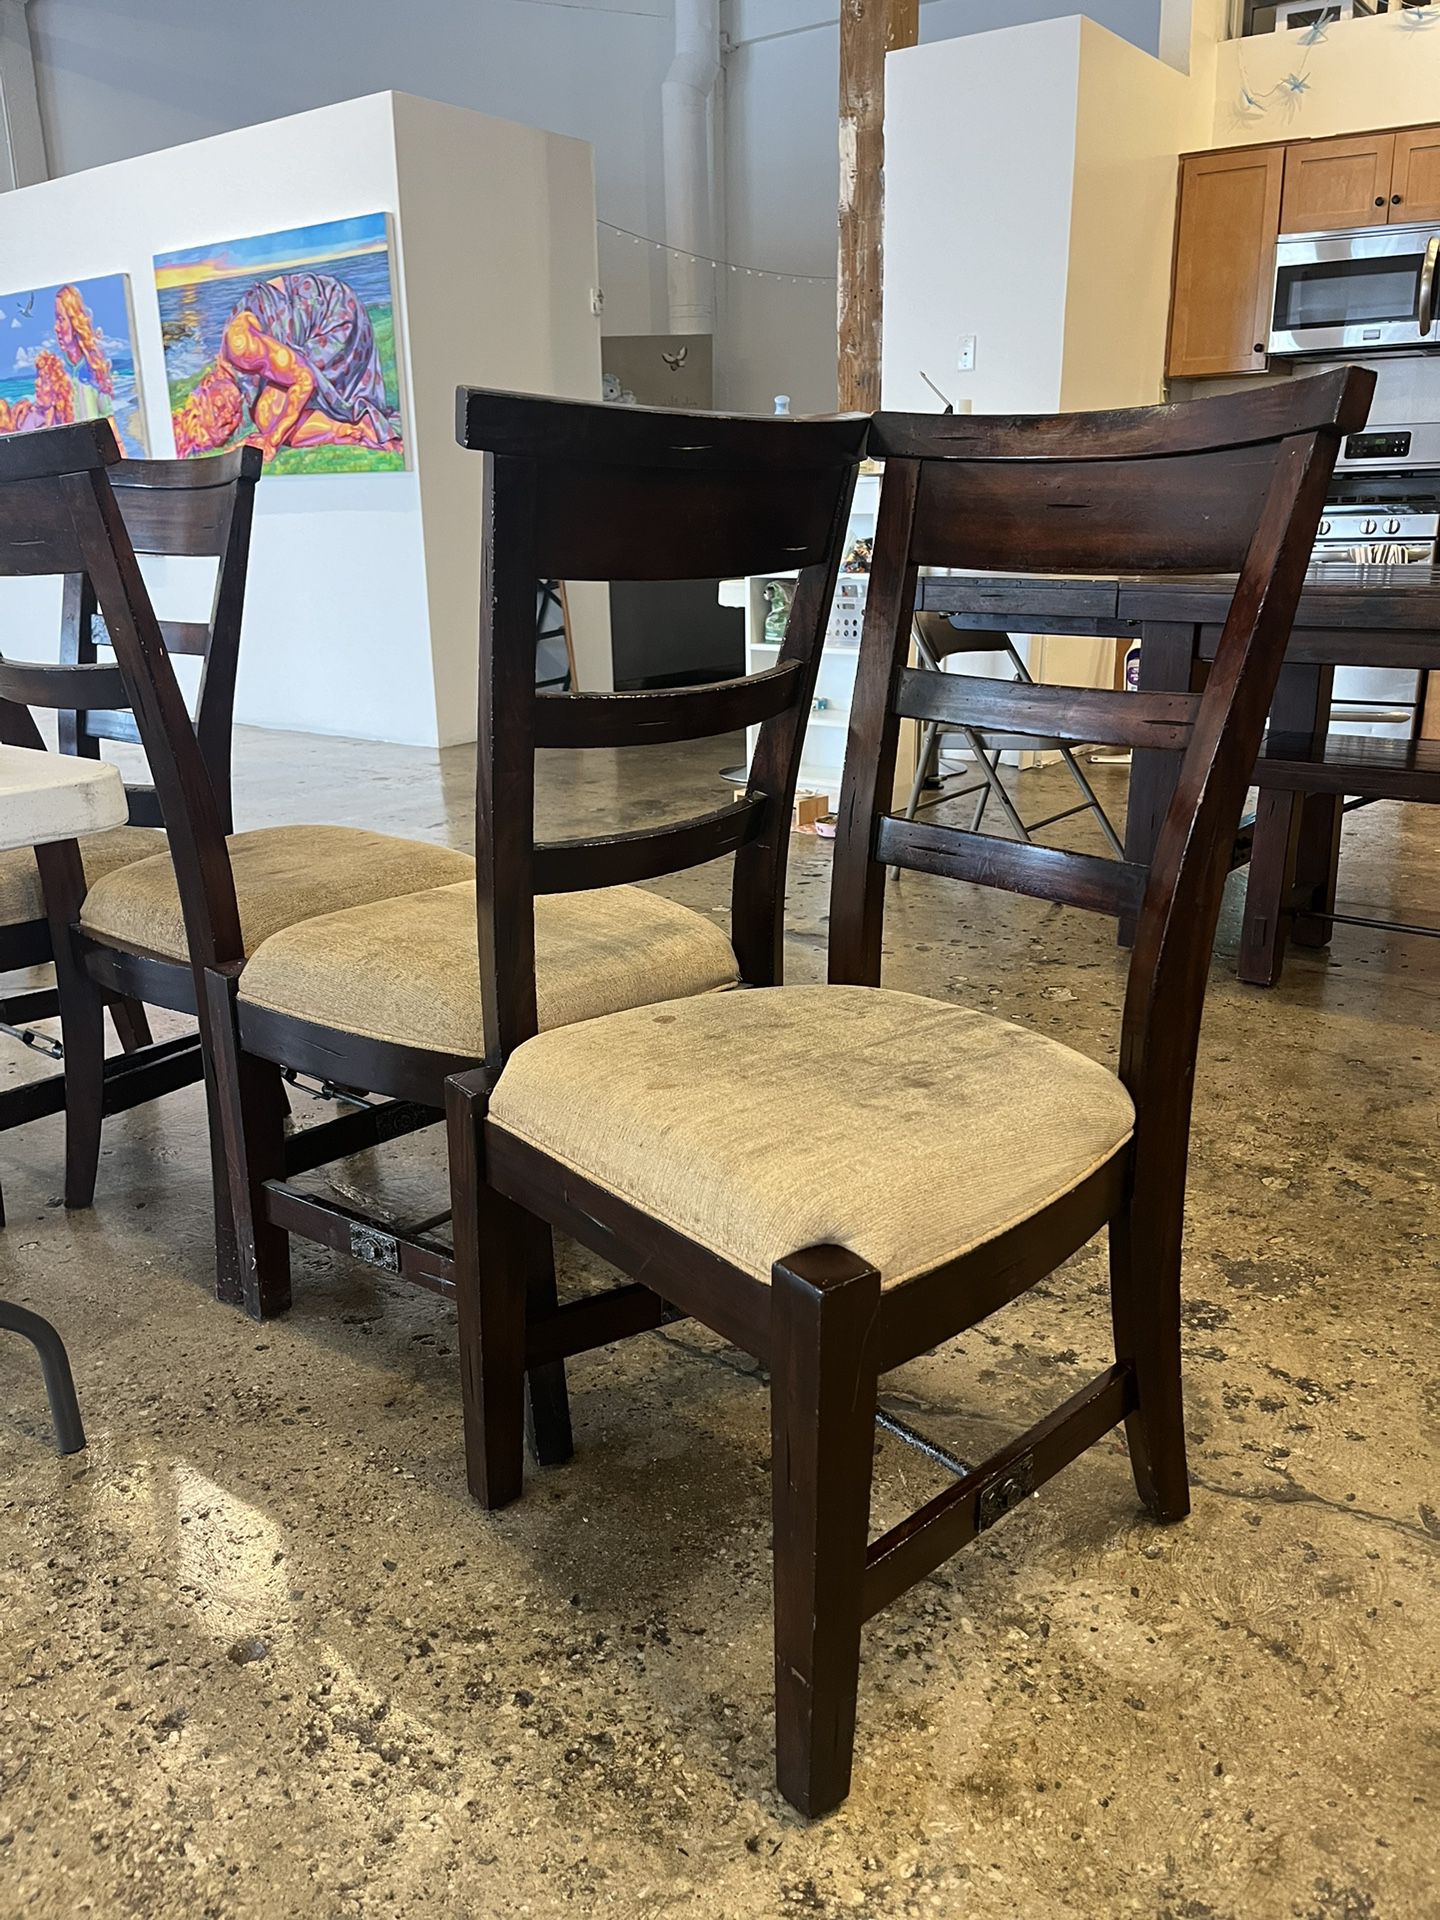 4 chairs FREE